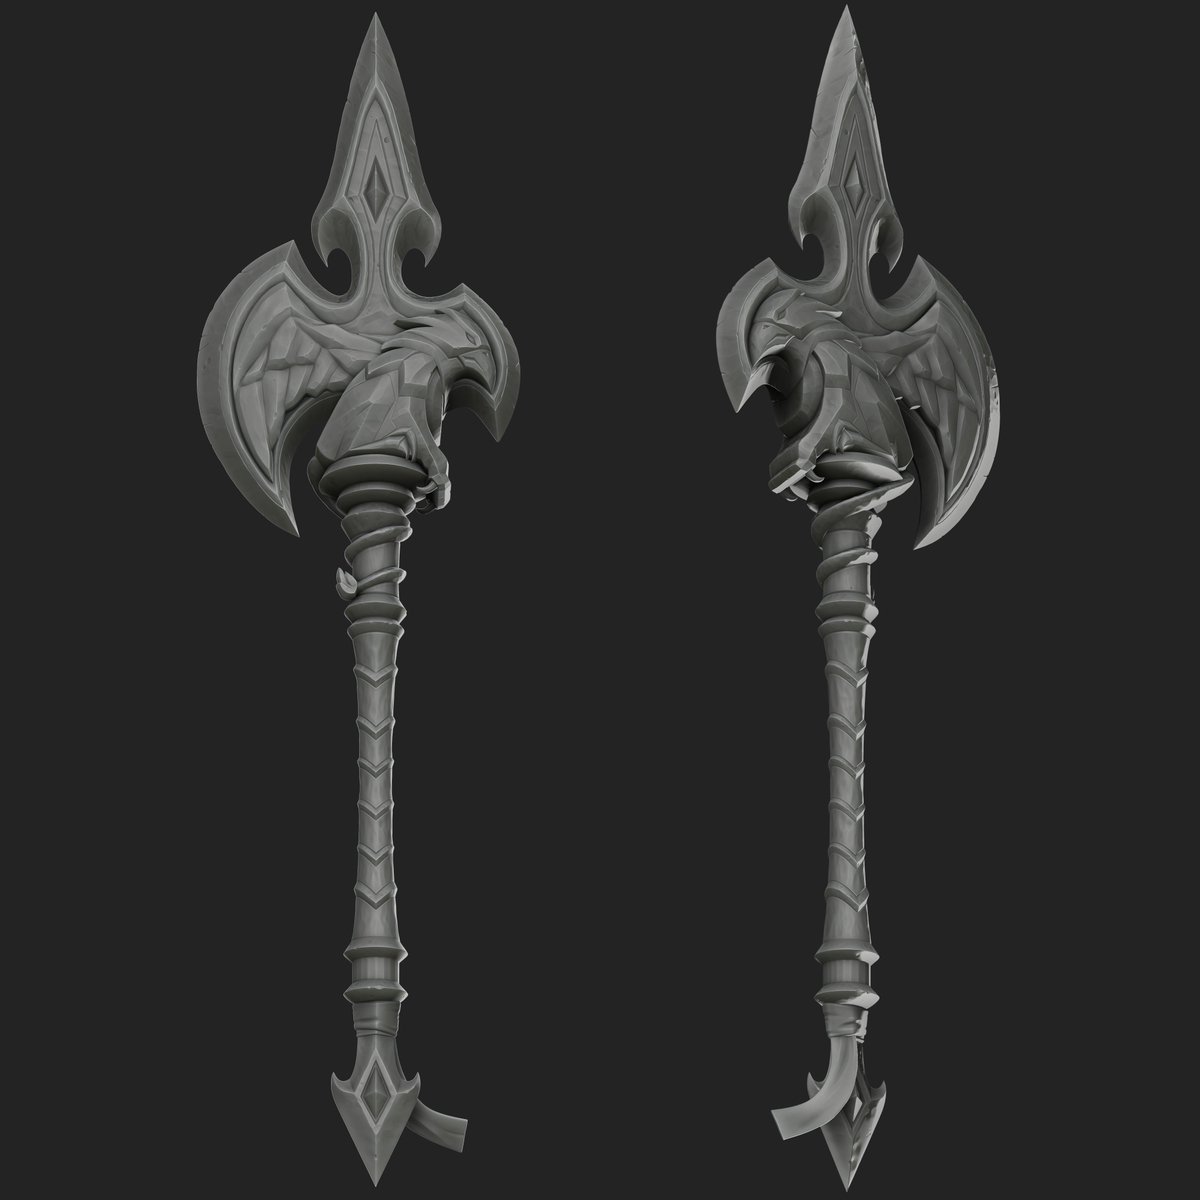 #wip on my upcomming project, hopfully i can finish the next week!👀
Based on one of Matthew McKeown's concept art!
--
#3d #3dsculpting #3dartist #zbrush #blender3d #digitalsculpt #digitalartist #fantasy #gameart #digitalart #prop #stylizedstation #arts #artstation #warcraft